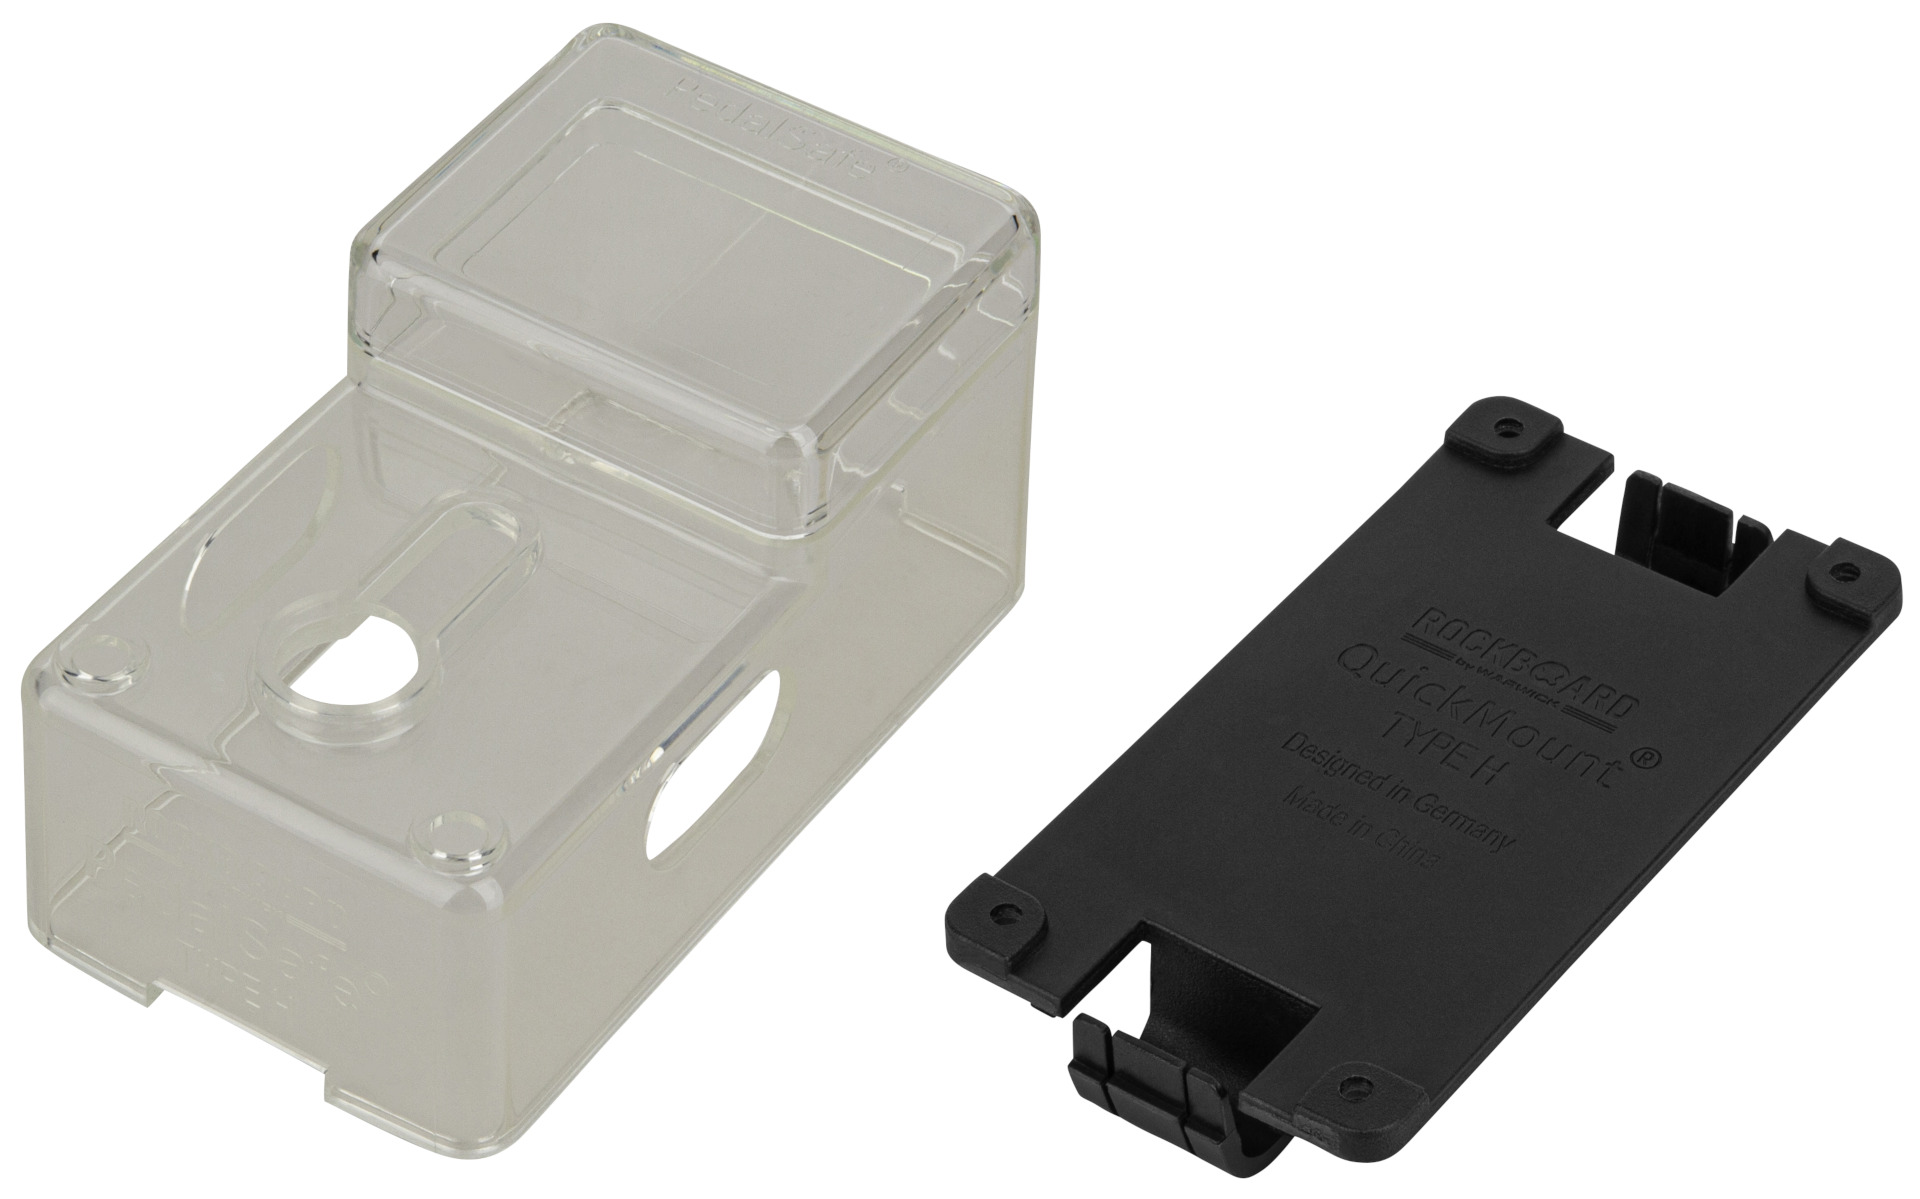 RockBoard PedalSafe Type H - Protective Cover And RockBoard Mounting Plate For Digitech Compact Pedals